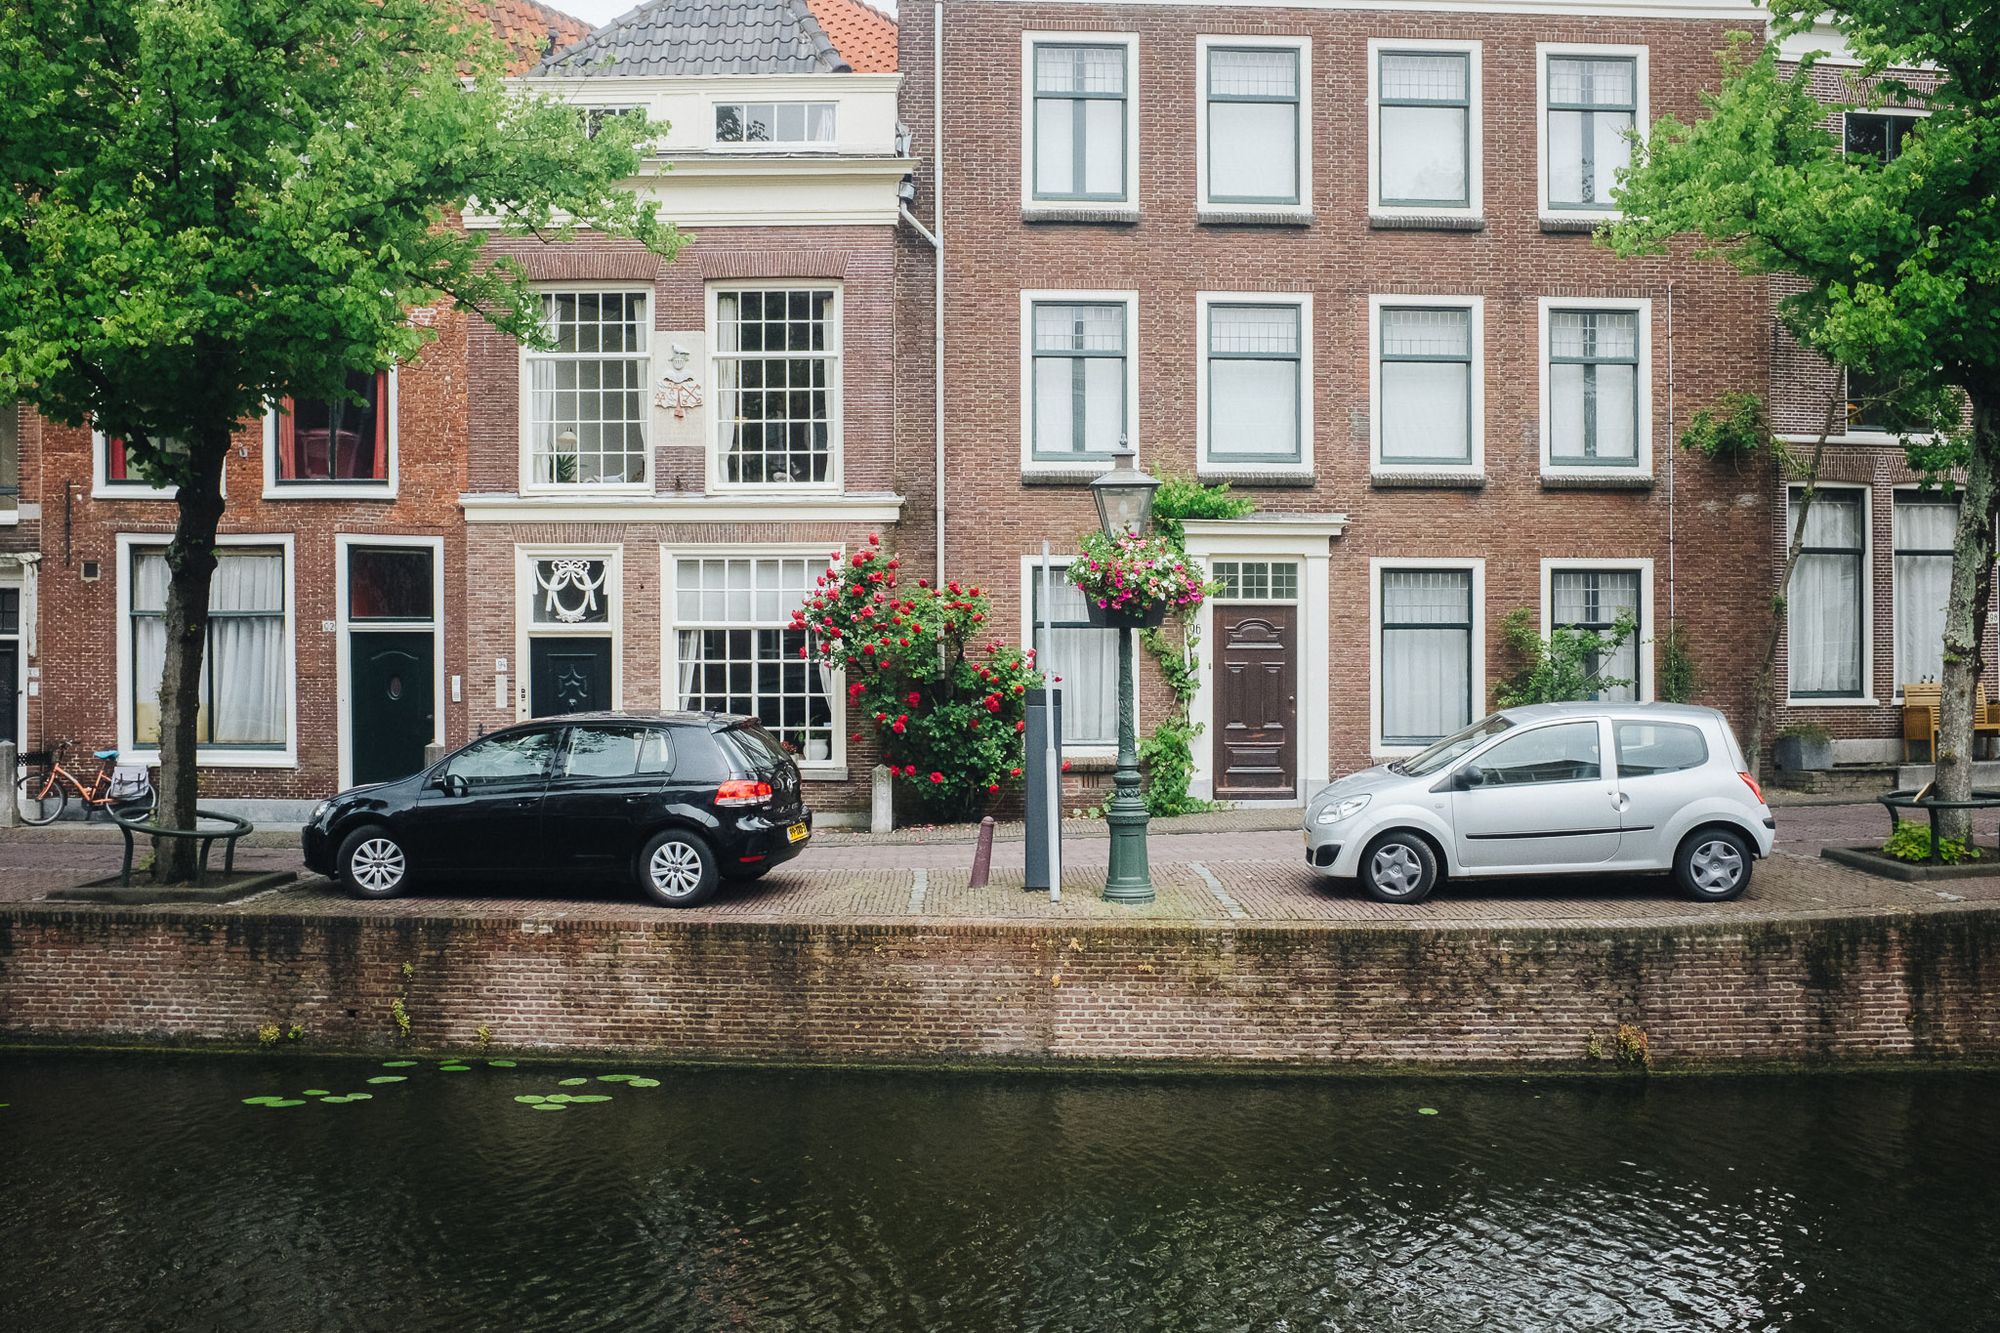 2 parked cars outside homes in Leiden. The canal is empty and there are big green trees either side of the houses.